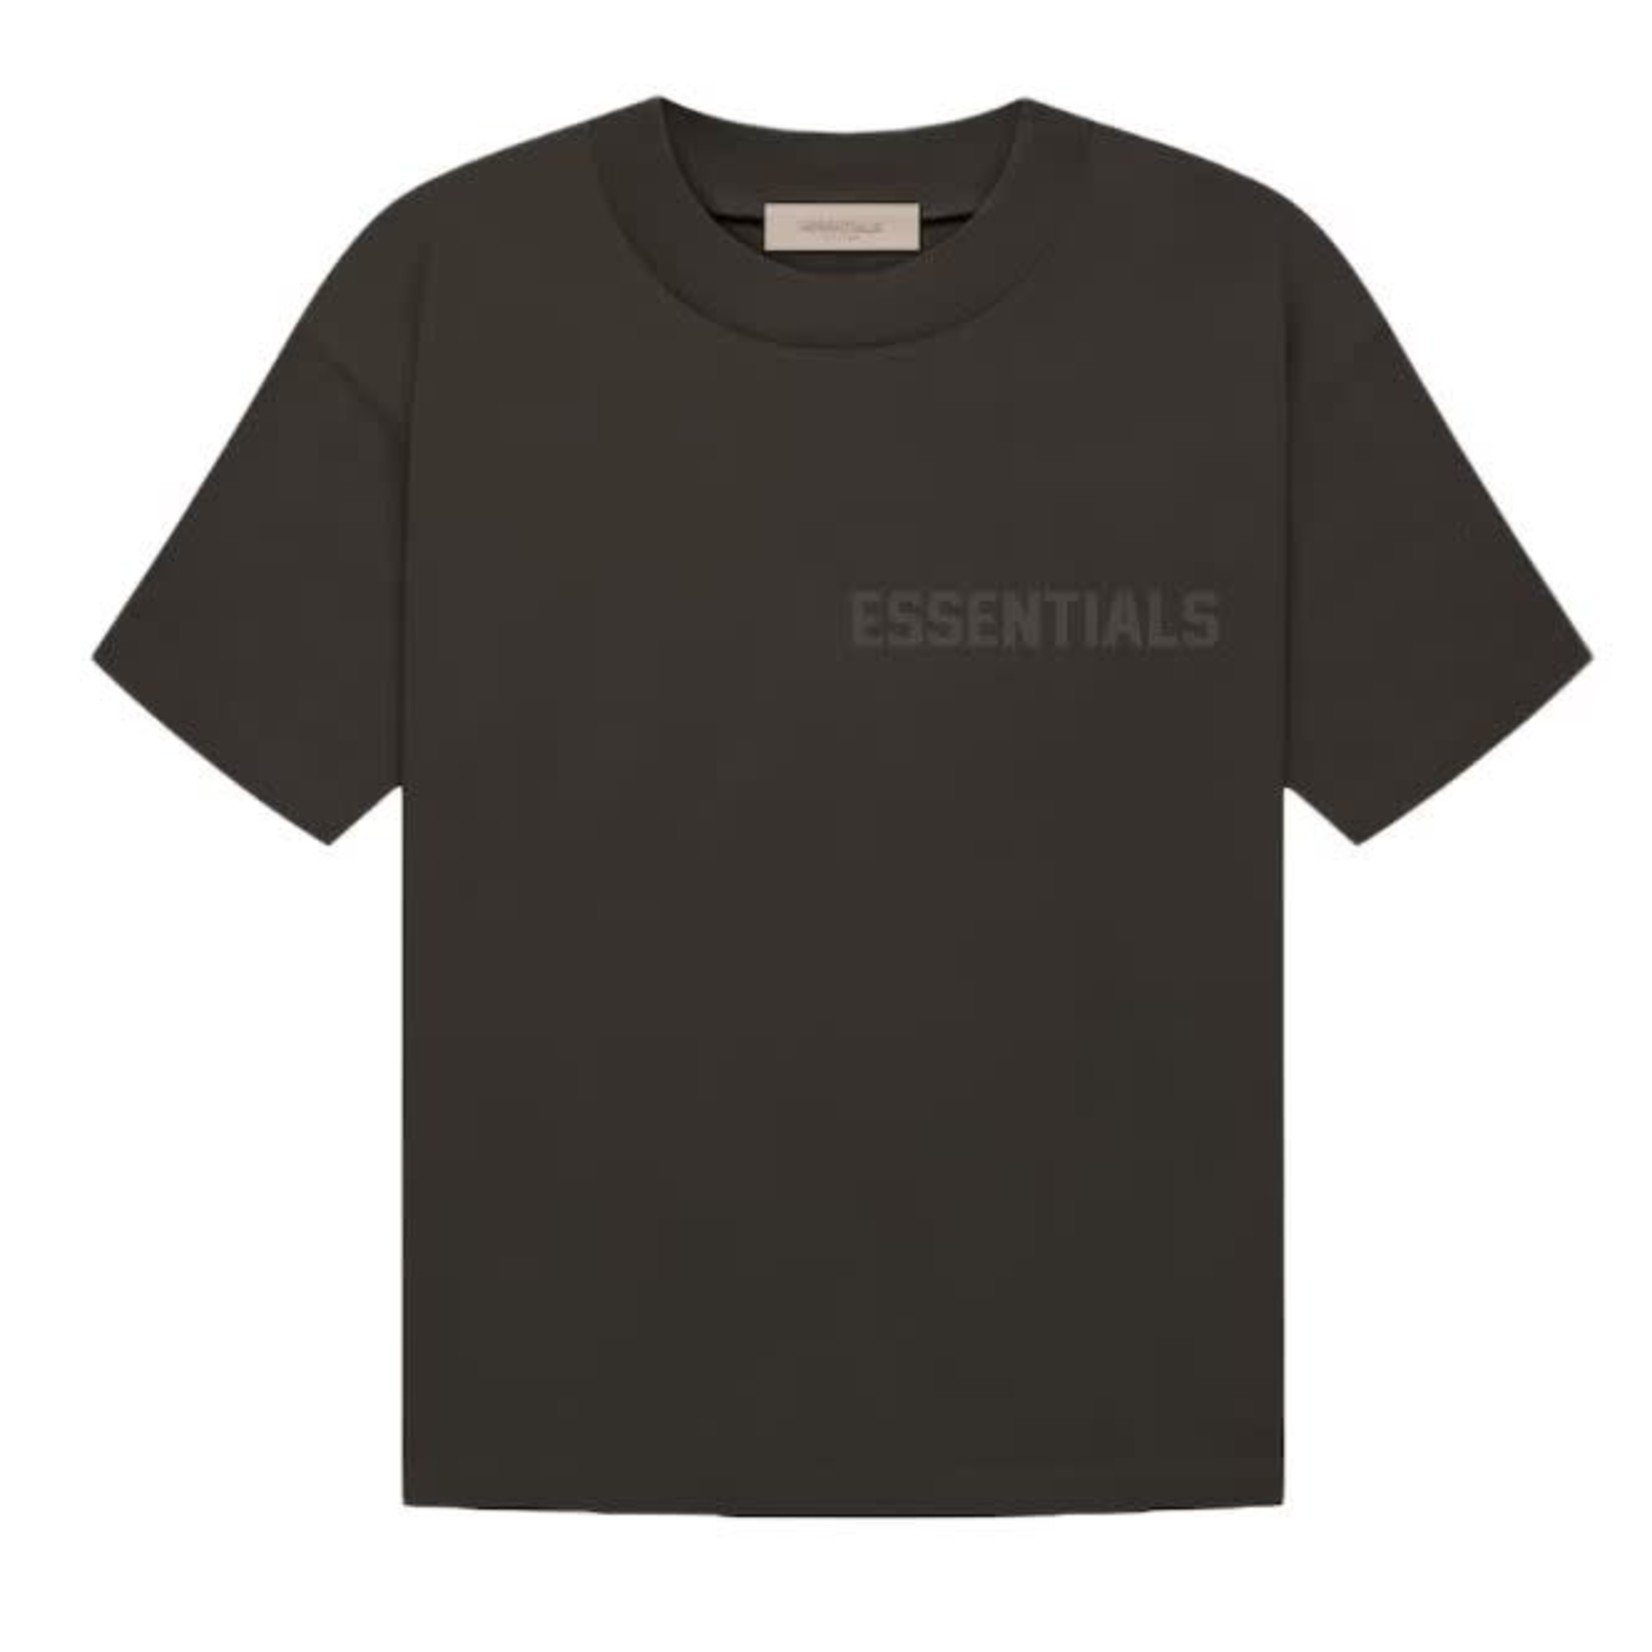 Fear of God Fear Of God Essentials T-Shirt Off Black Size XLarge, DS BRAND NEW